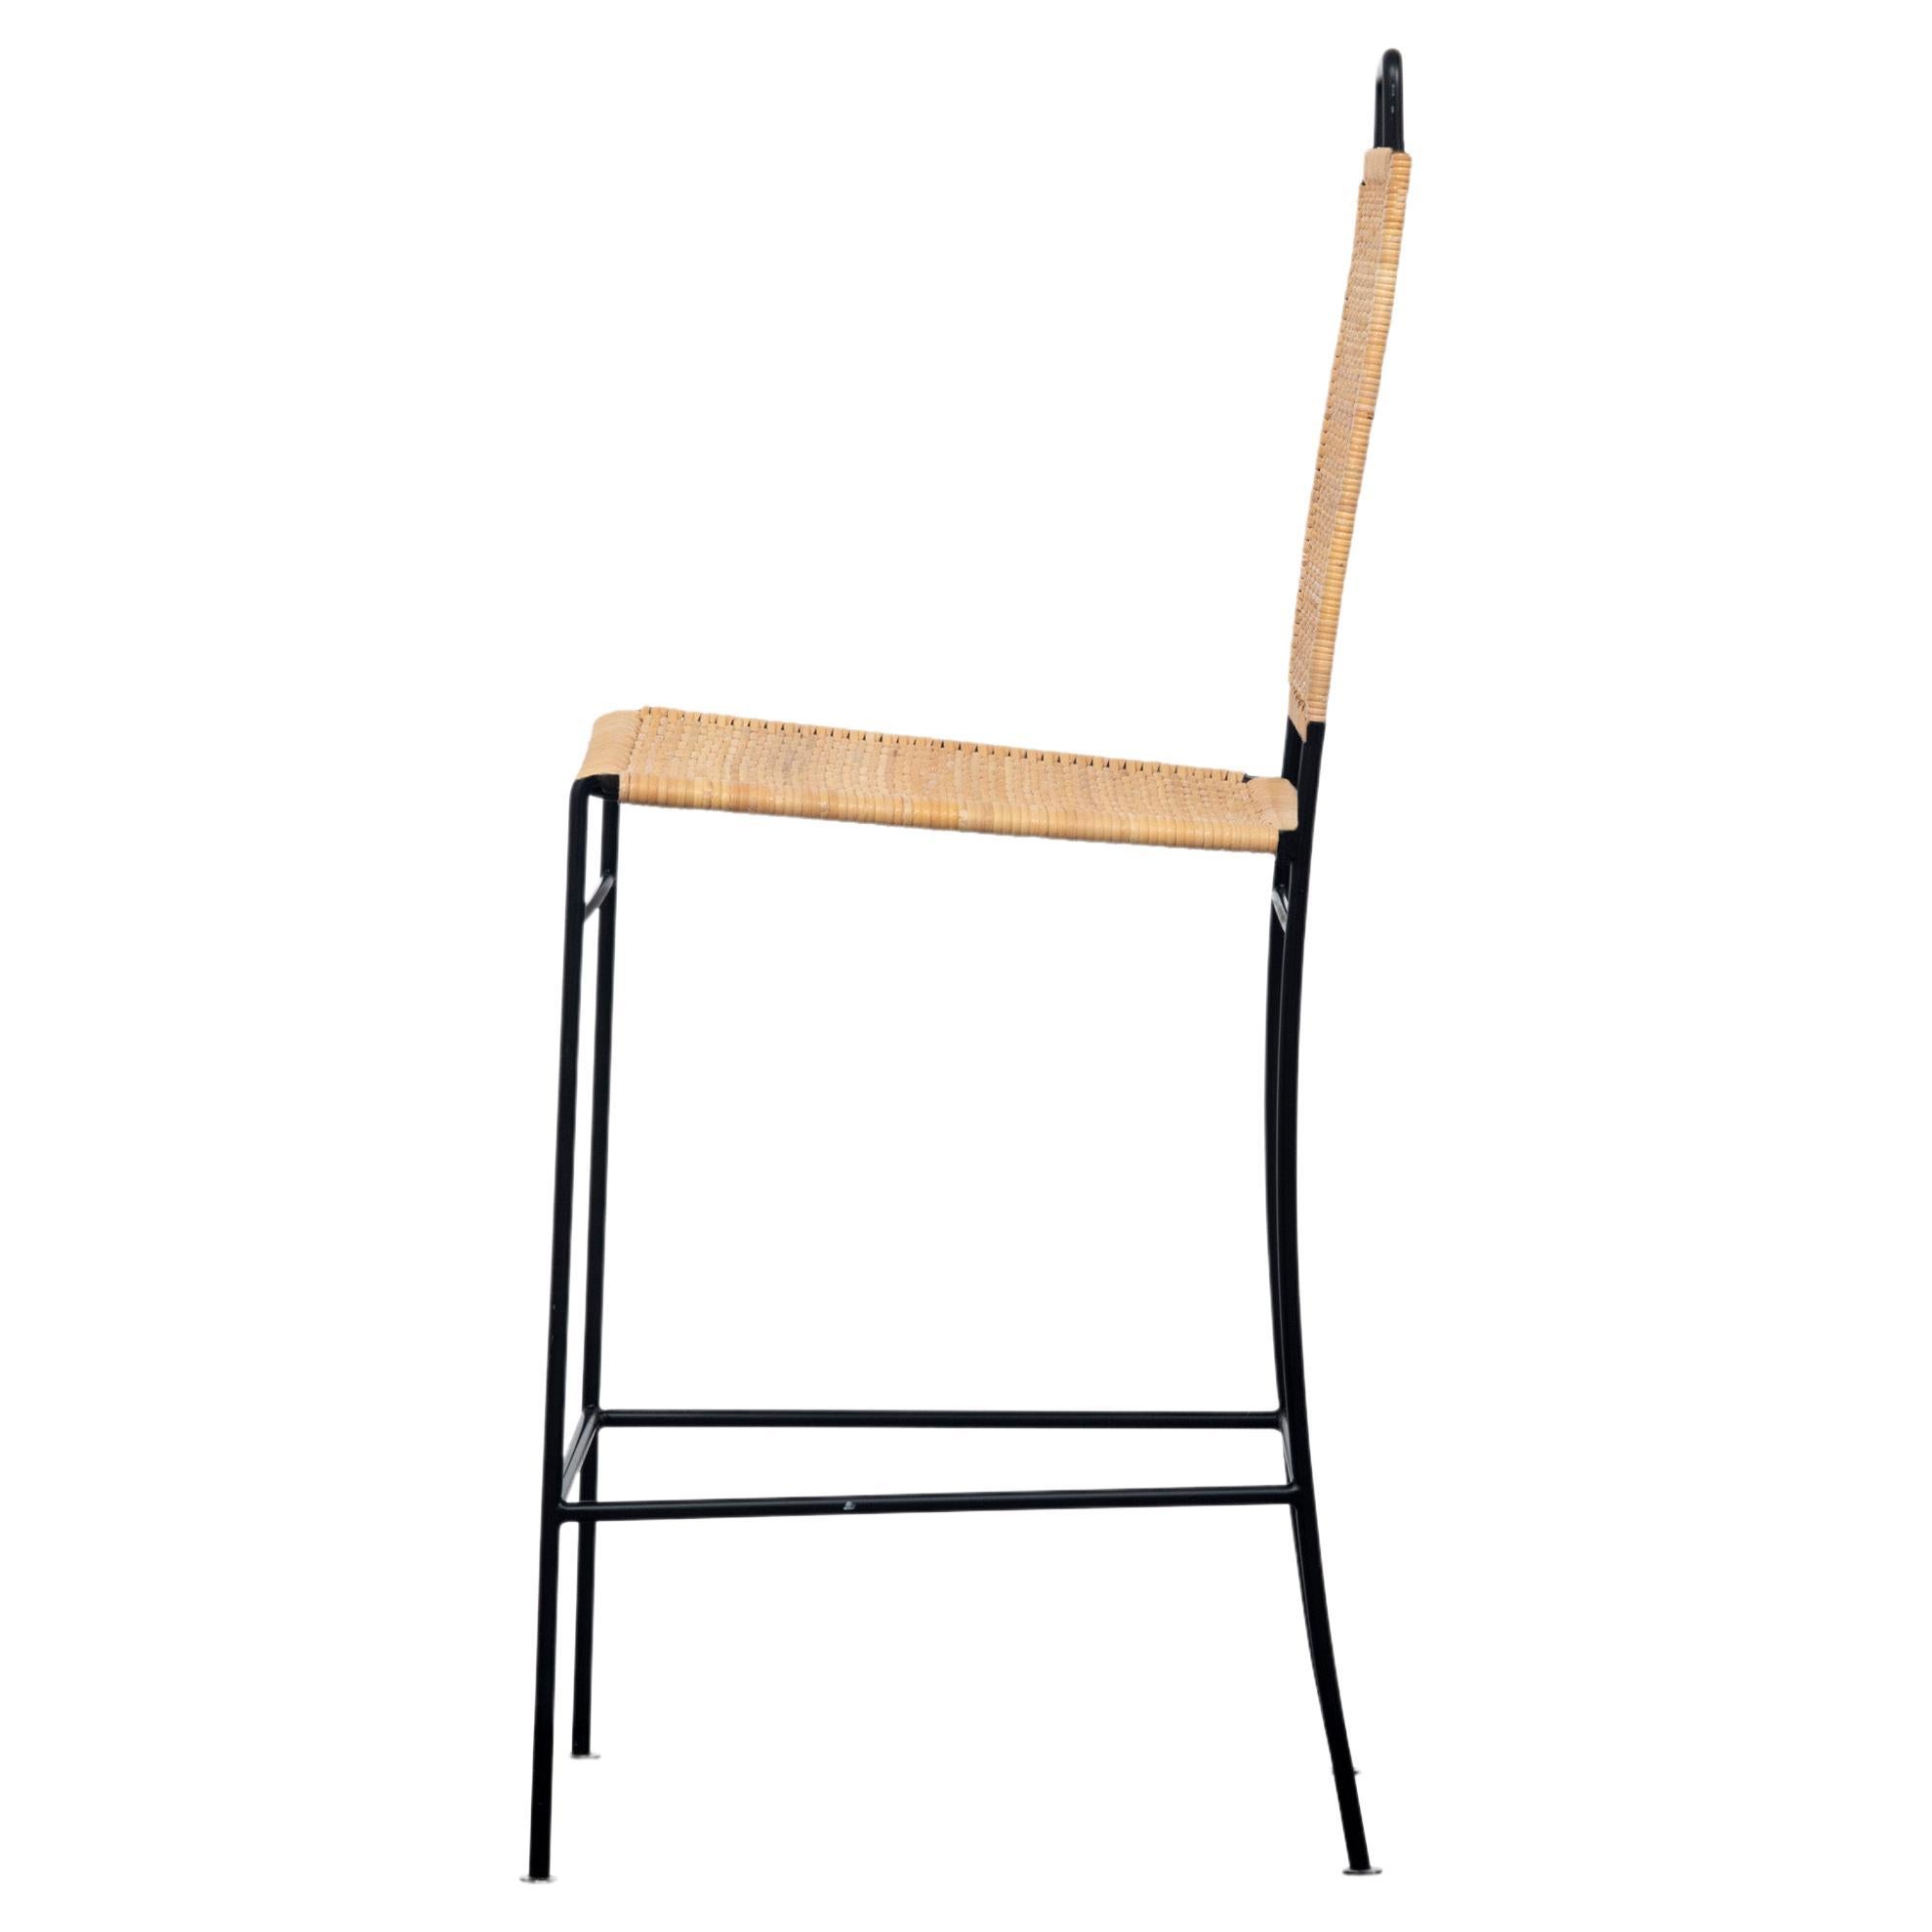 The Philipp tall woven chair has a blackened steel frame with a handwoven back and seat of natural rush. Cross stretchers offer stability and the legs are finished with coin-shaped tabs.

The chair frame is also available in stainless